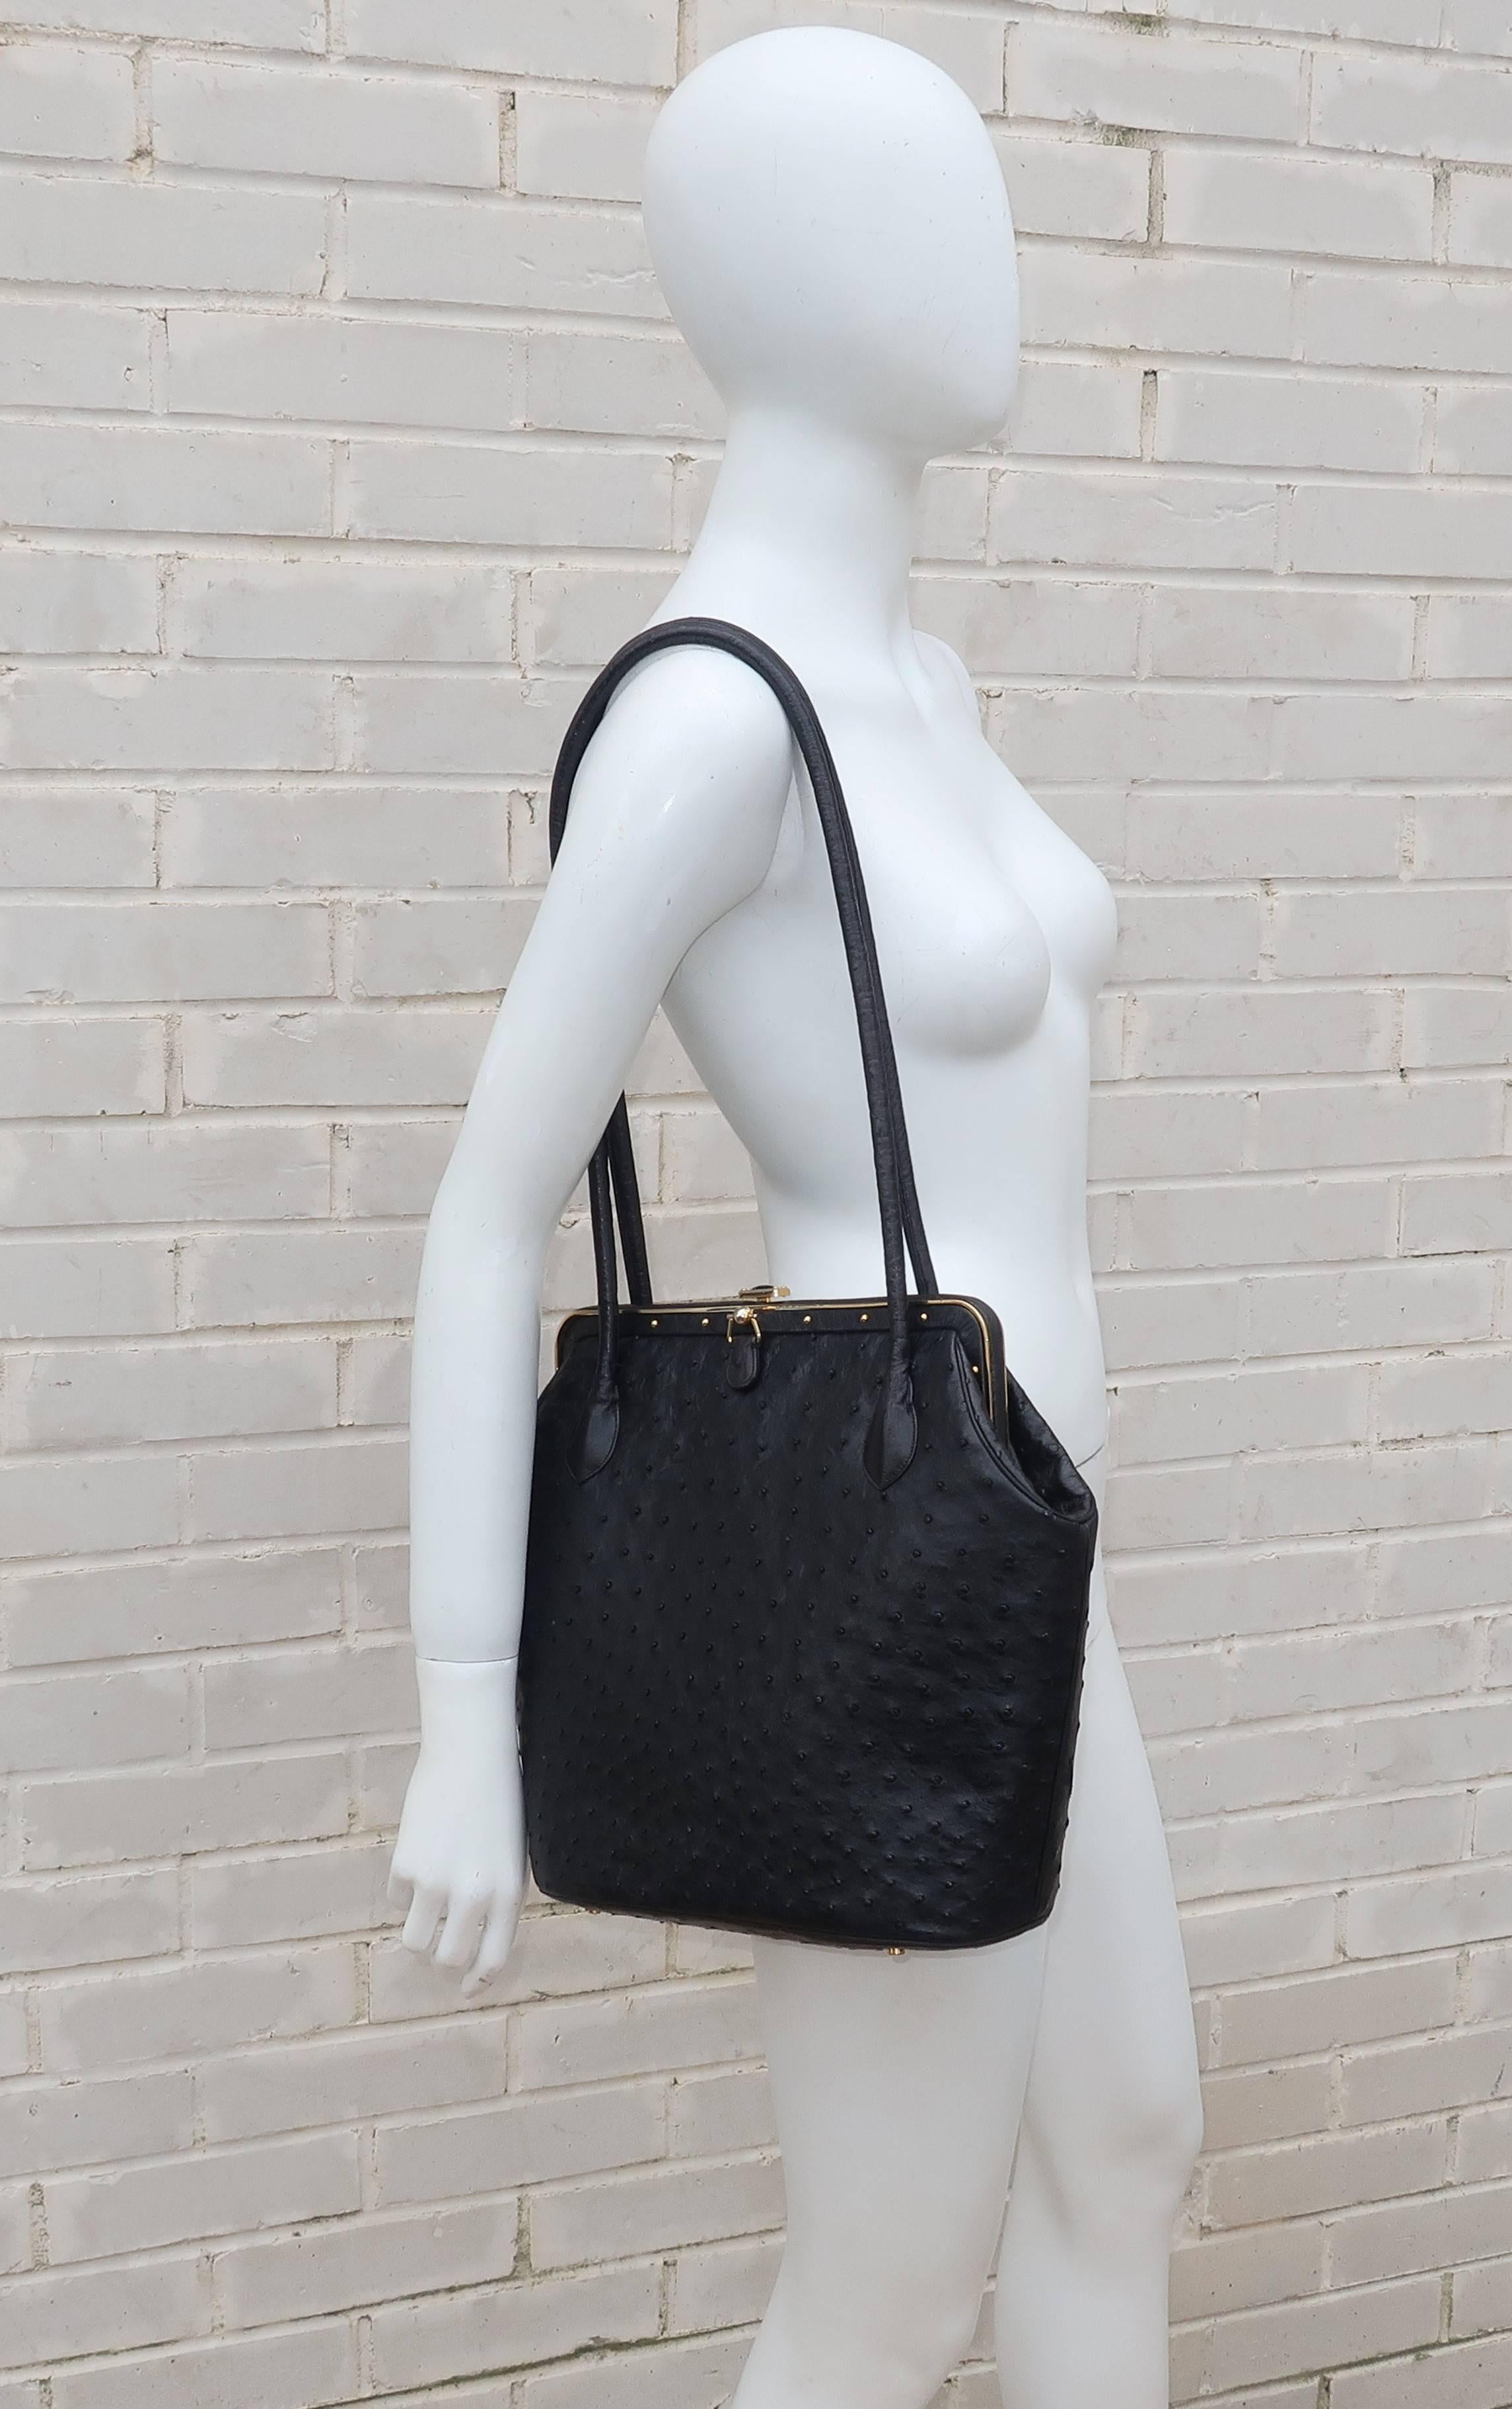 This fabulous Judith Leiber black ostrich handbag is both uncharacteristically large and a little edgy for the designer.  The body of the handbag measures 14.5